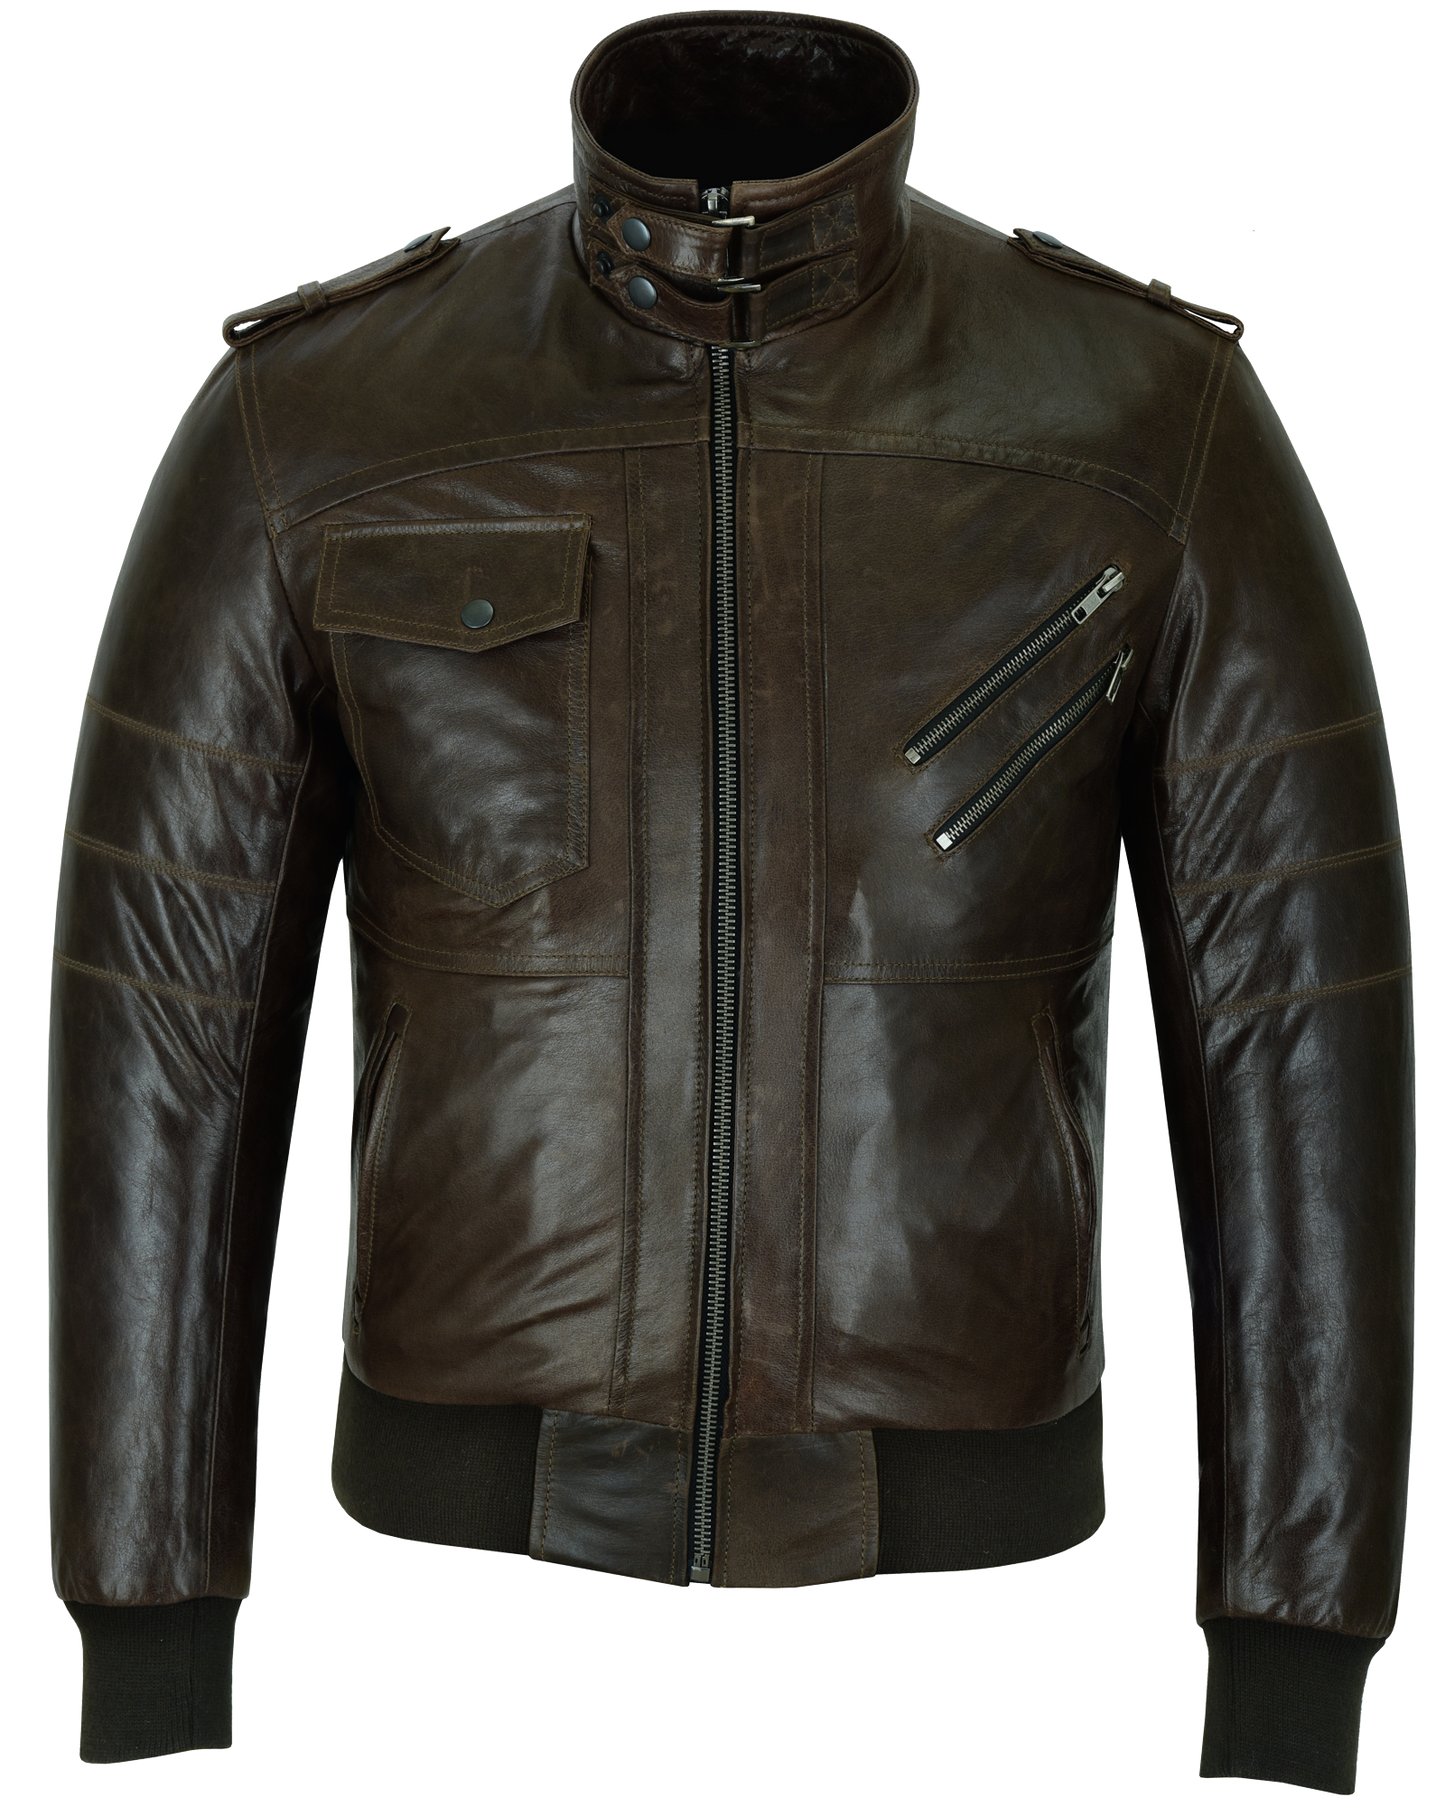 Vance Leather Men's Vincent Brown Waxed Premium Cowhide Motorcycle Leather Jacket with Removable hood